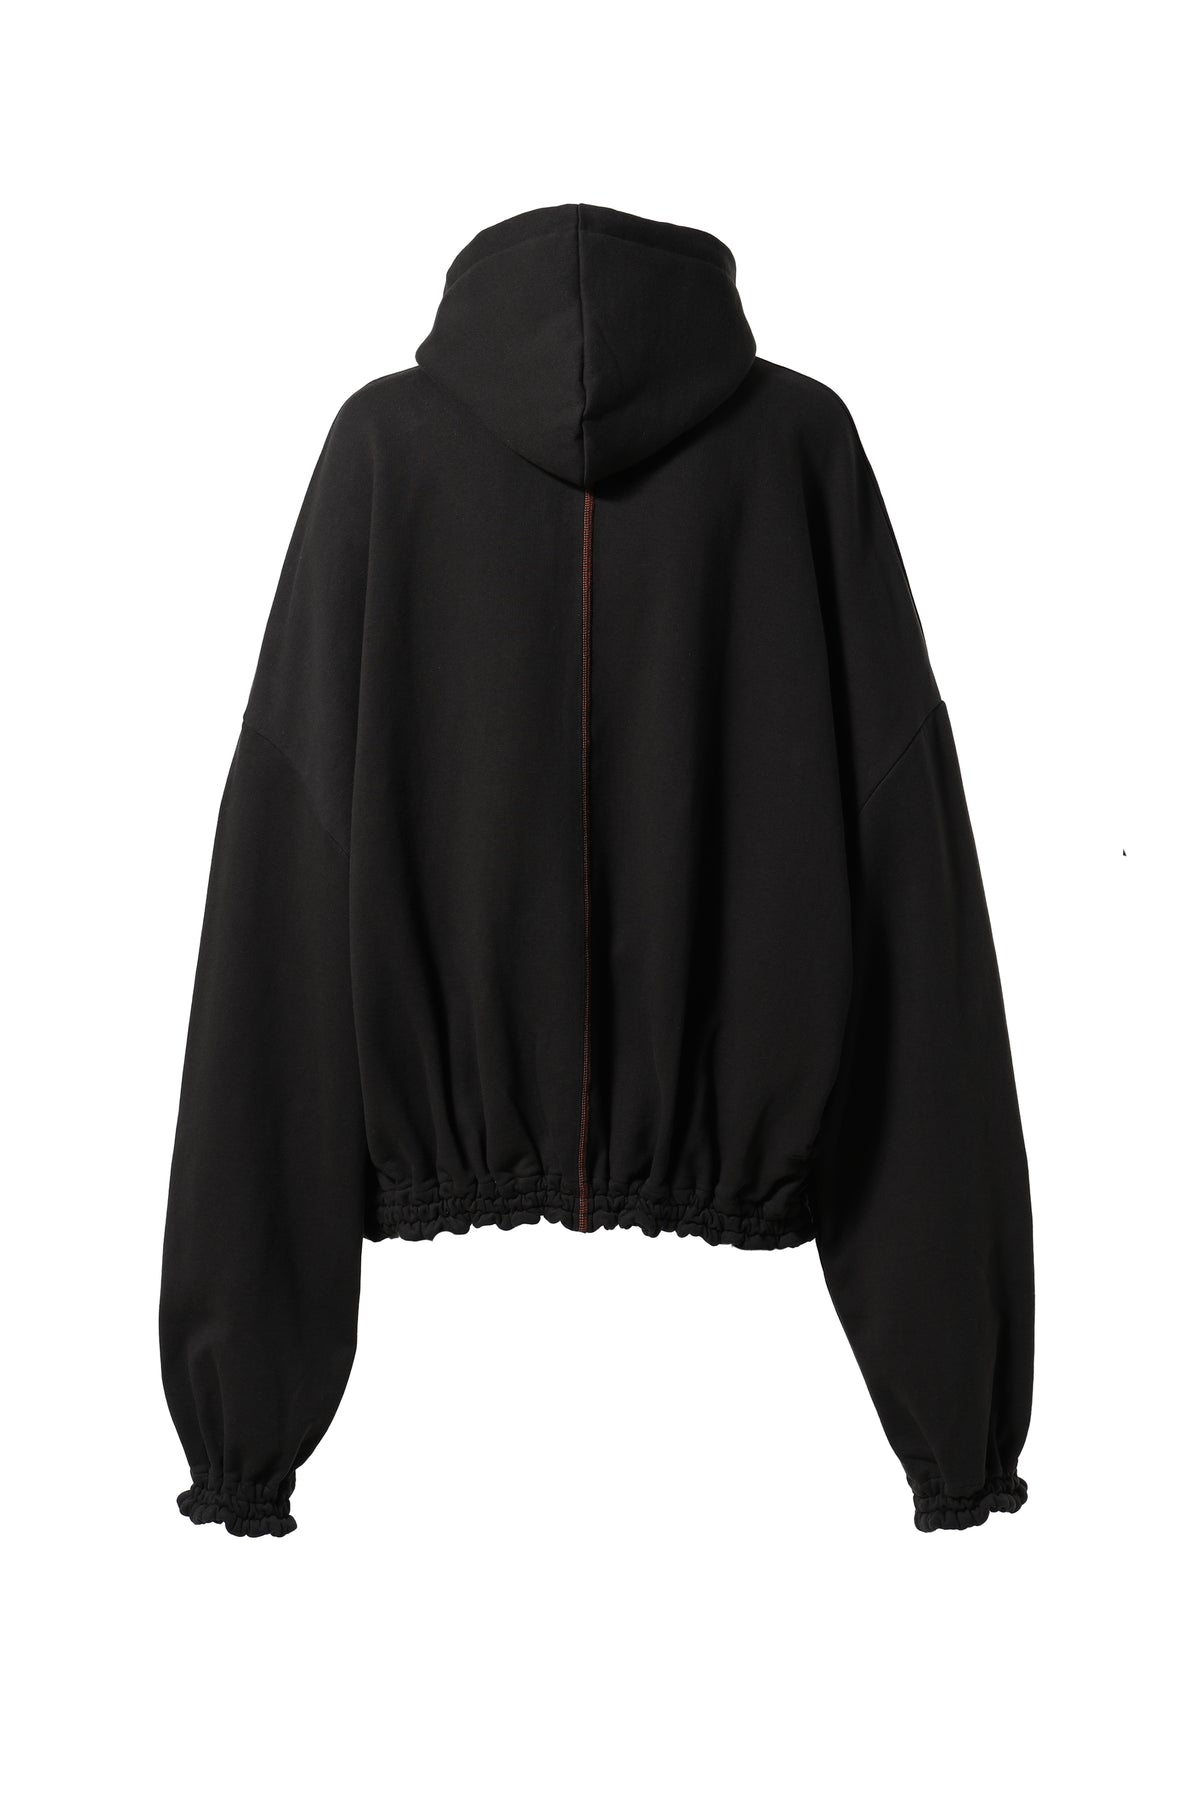 ORDINARY GIANT HOODIE / OFF BLK